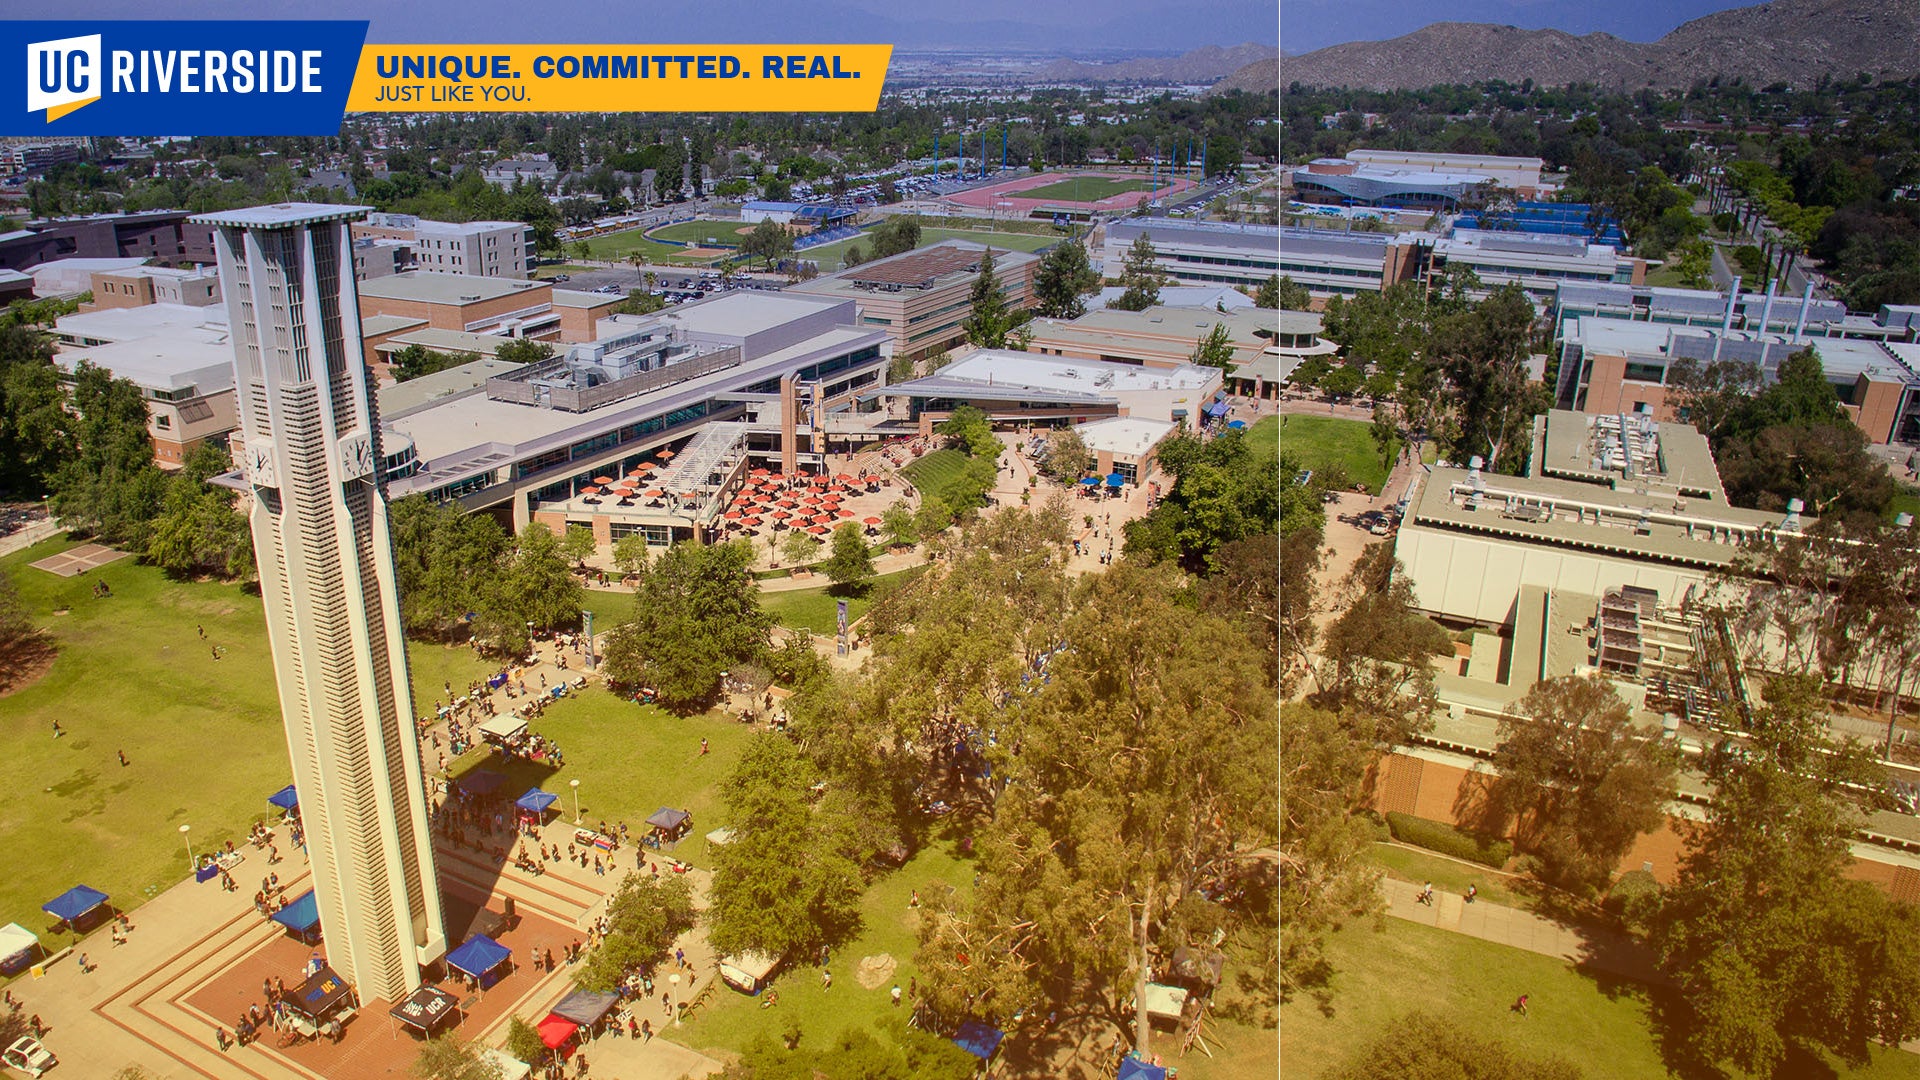 Download: UC Riverside Zoom Background - UCR Aerial View